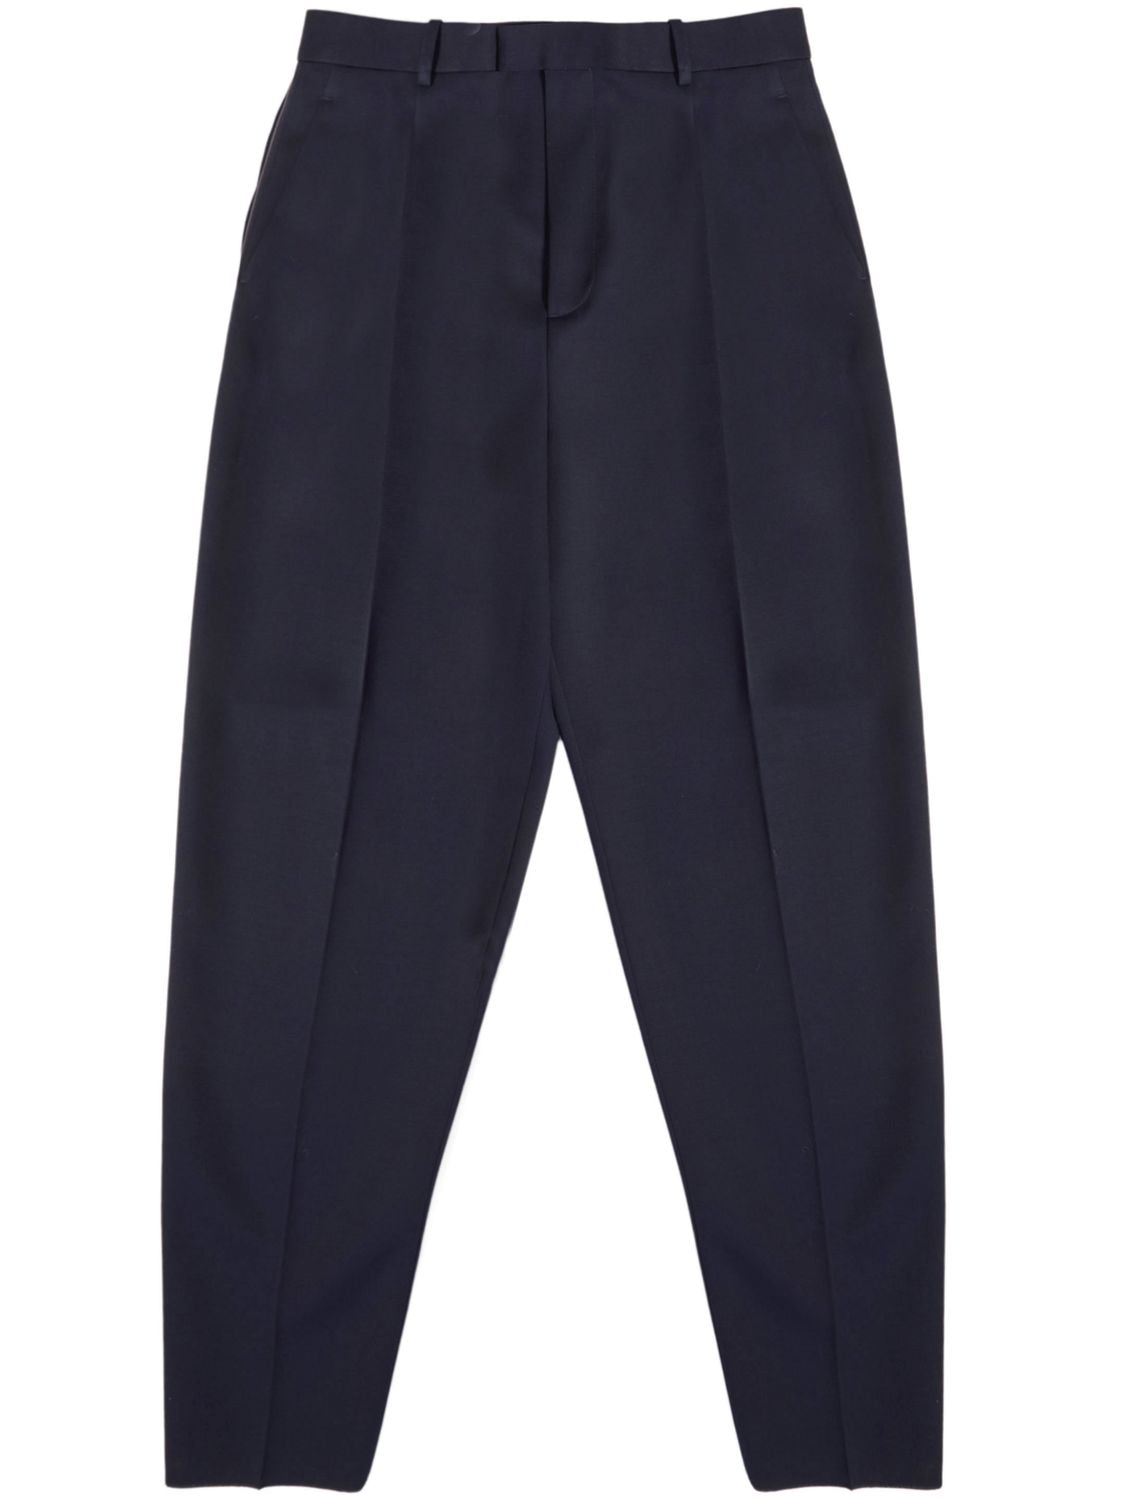 BOTTEGA VENETA High-Waisted Blue Wool Trousers with Belt Loops - Women's Relaxed Fit